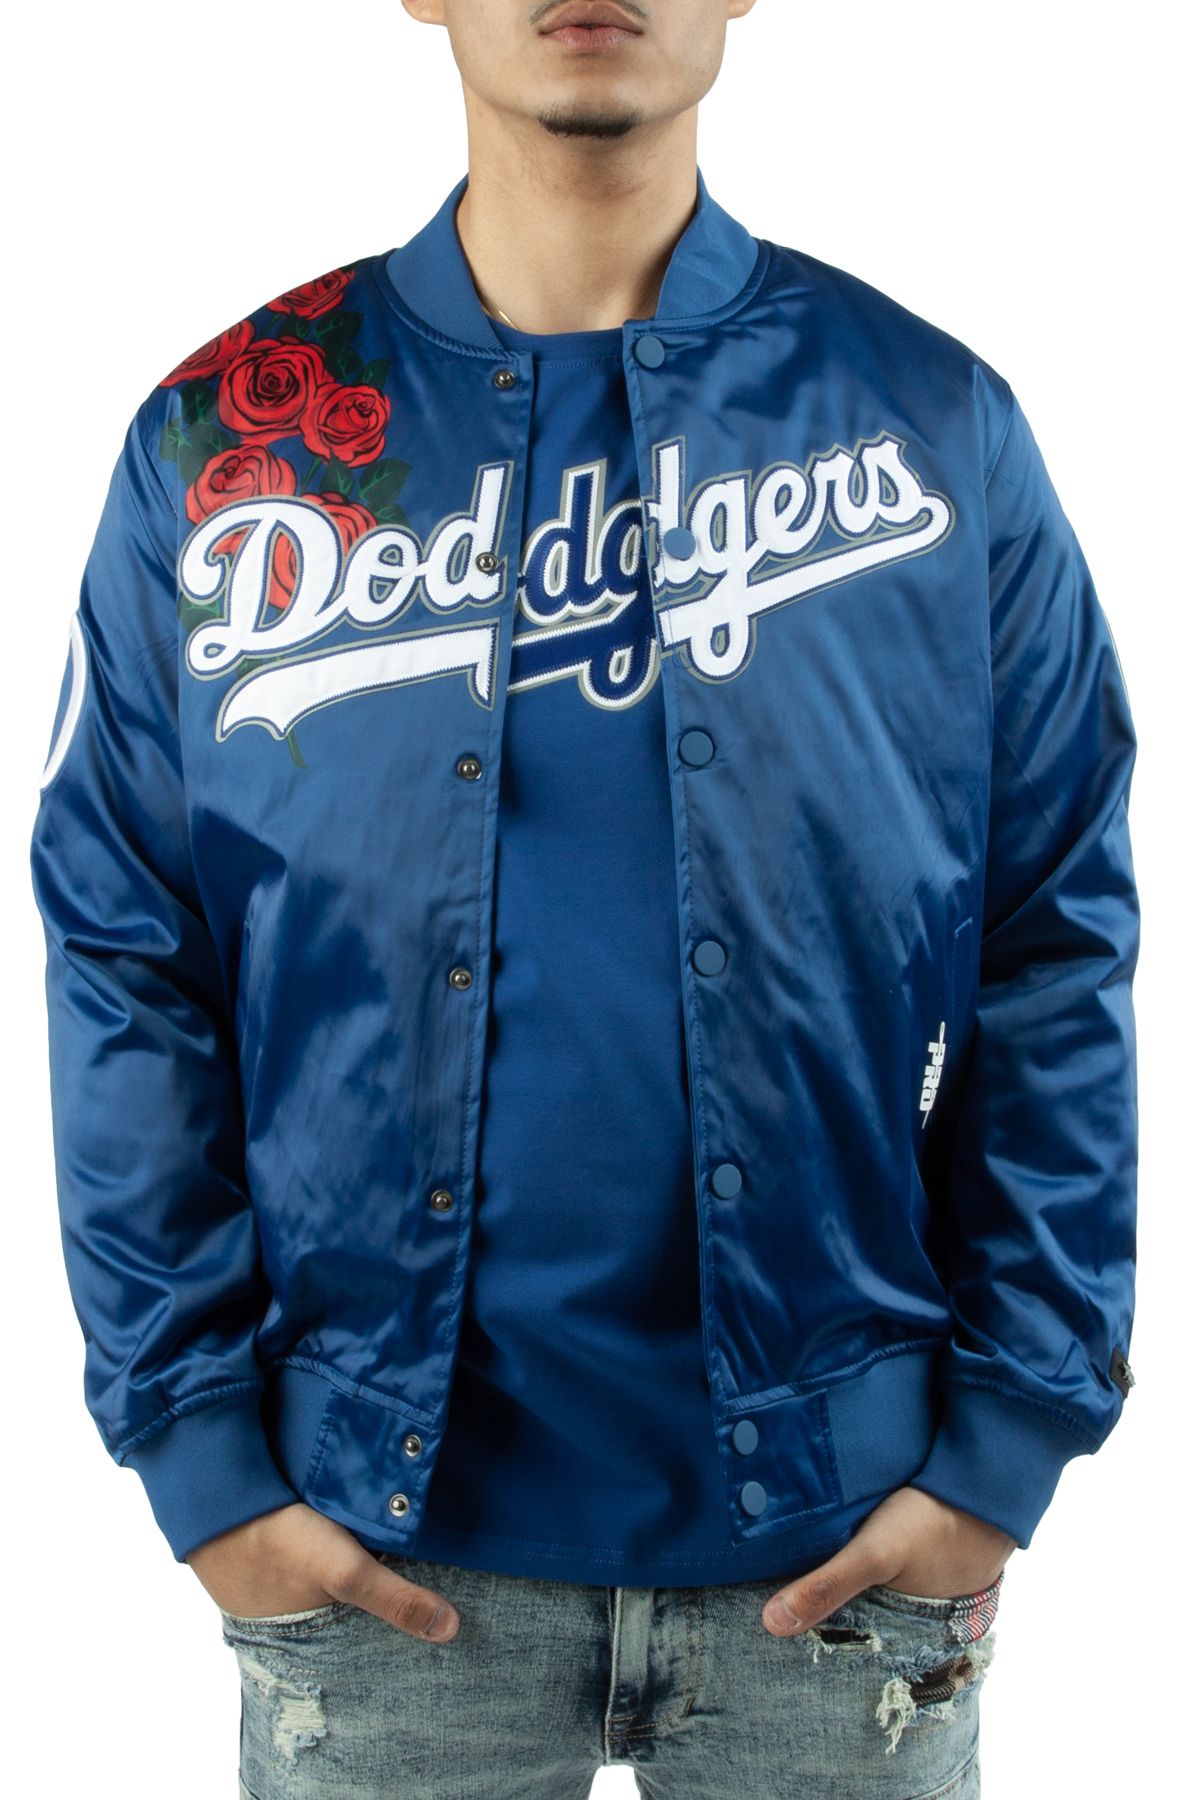 Presenting 'Los Dodgers,' dressed in blue from head to toe - Los